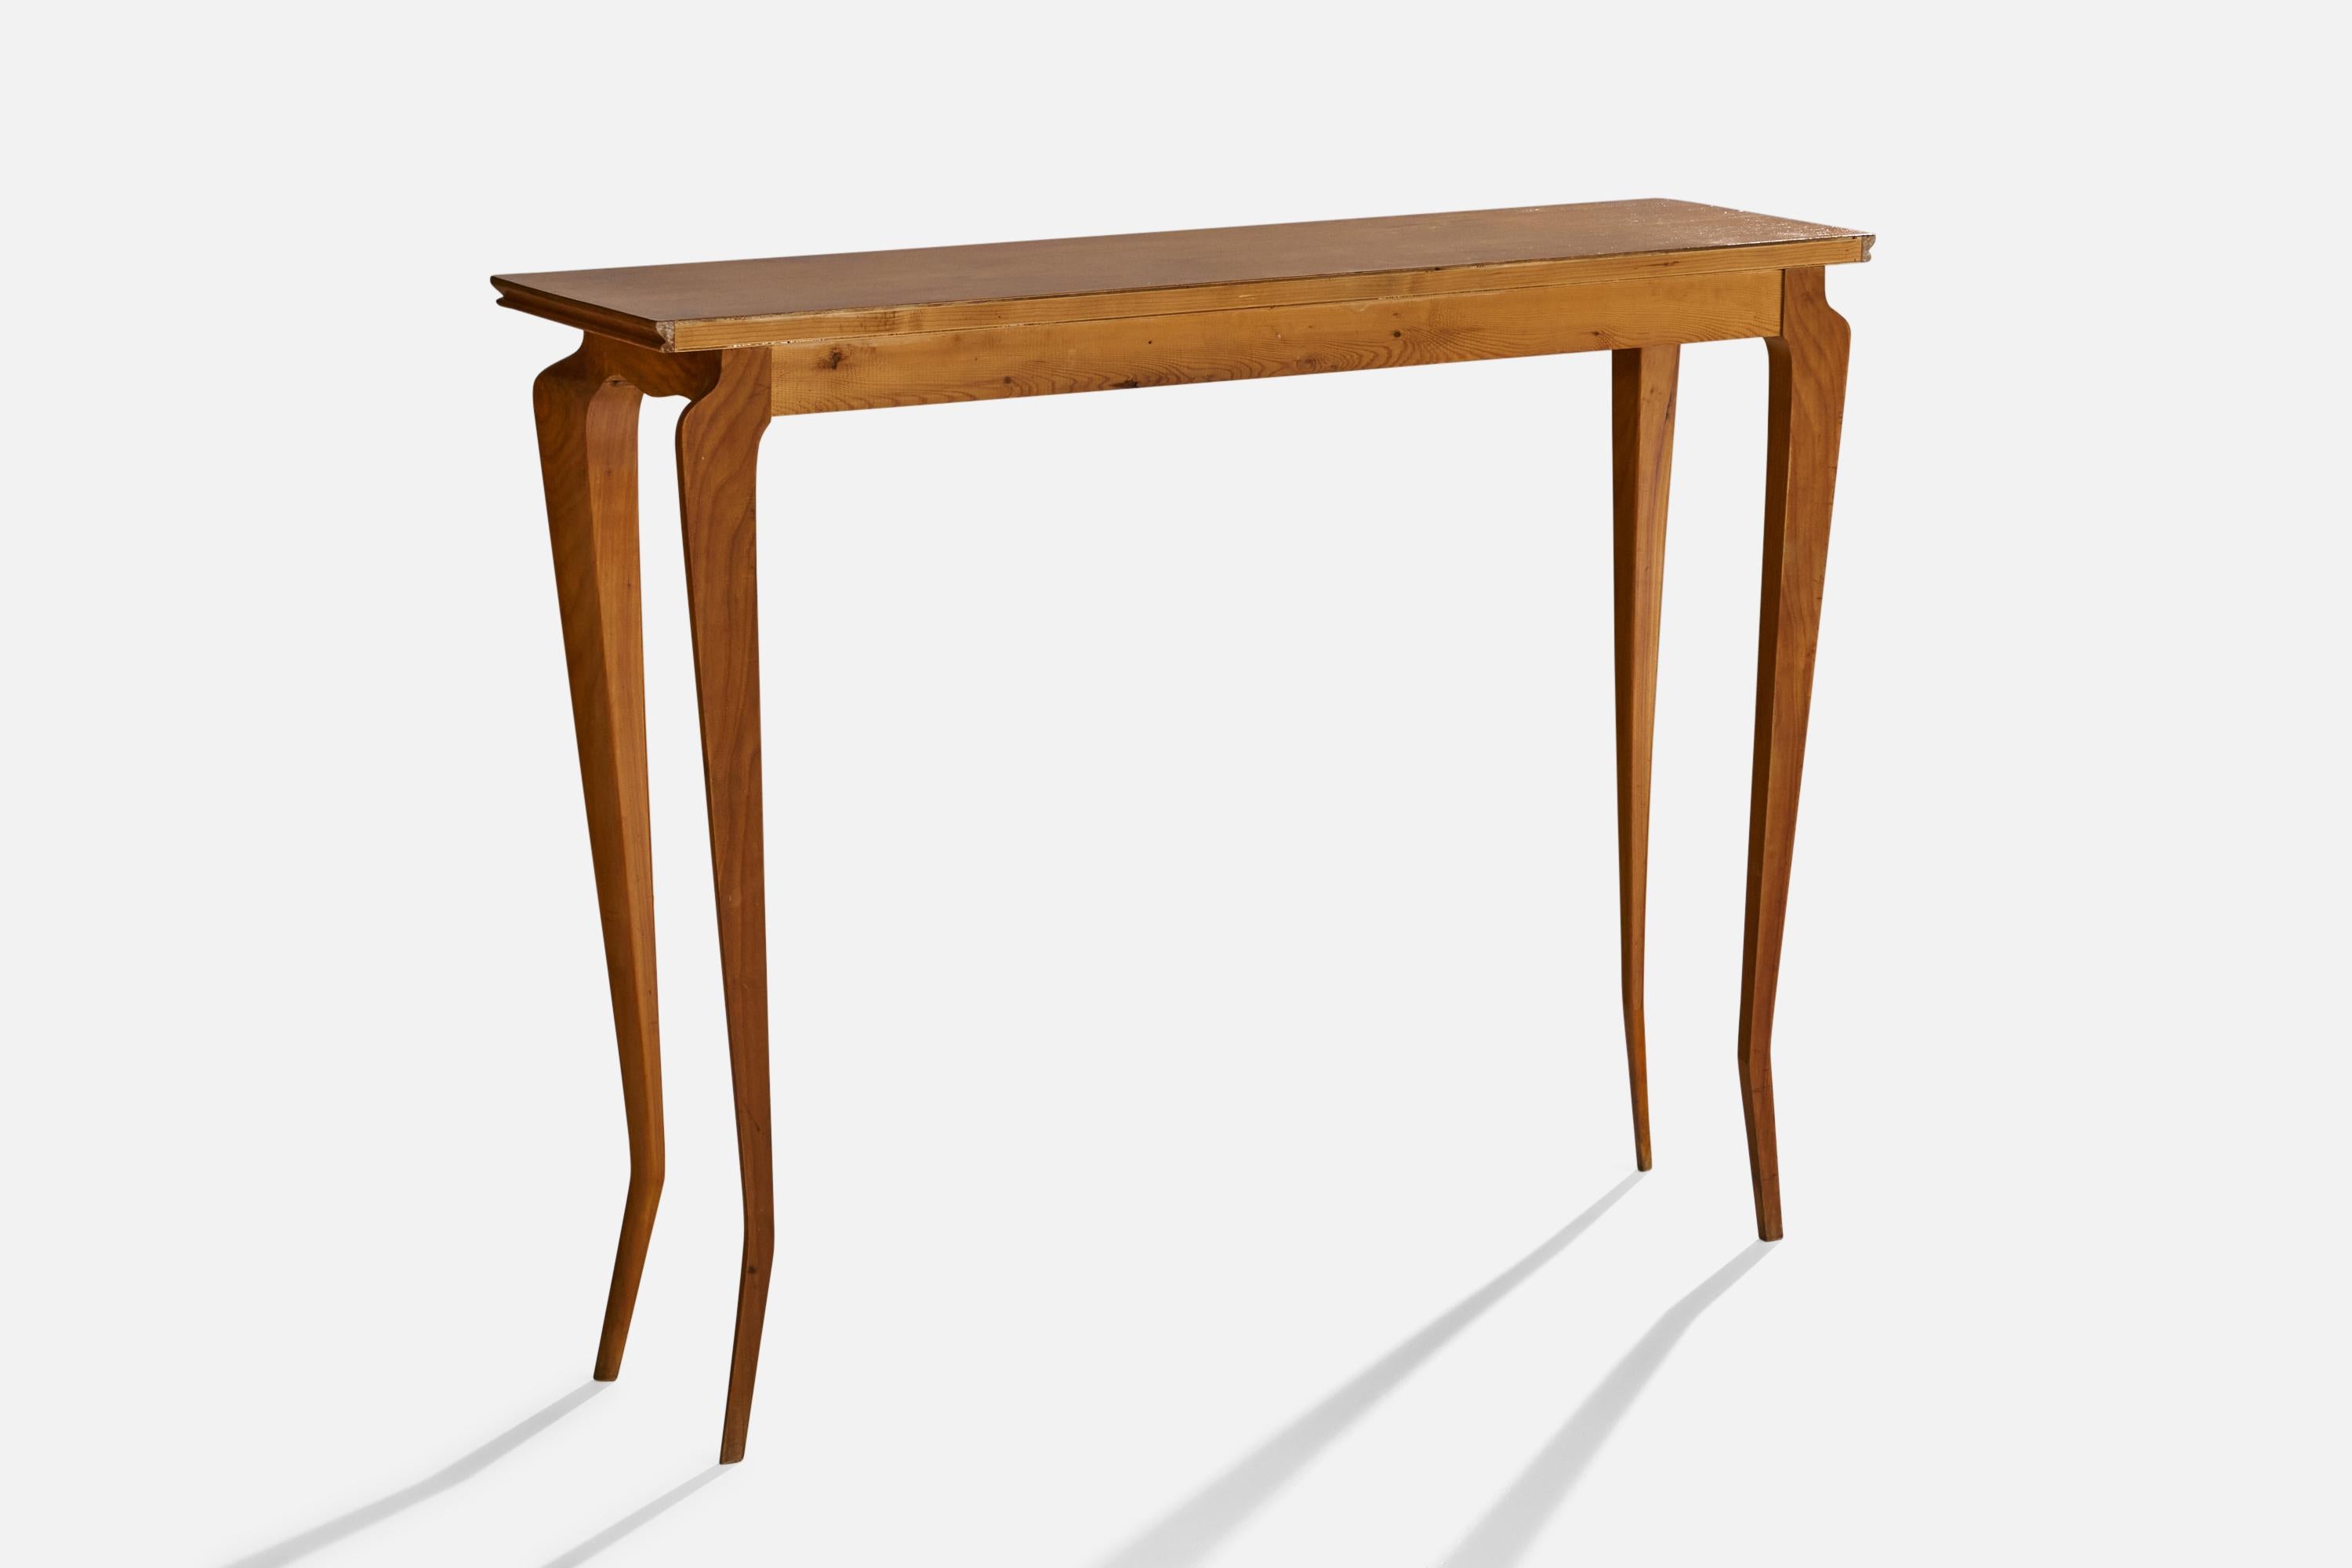 Italian Designer, Console Table, Wood, Italy, 1960s For Sale 2